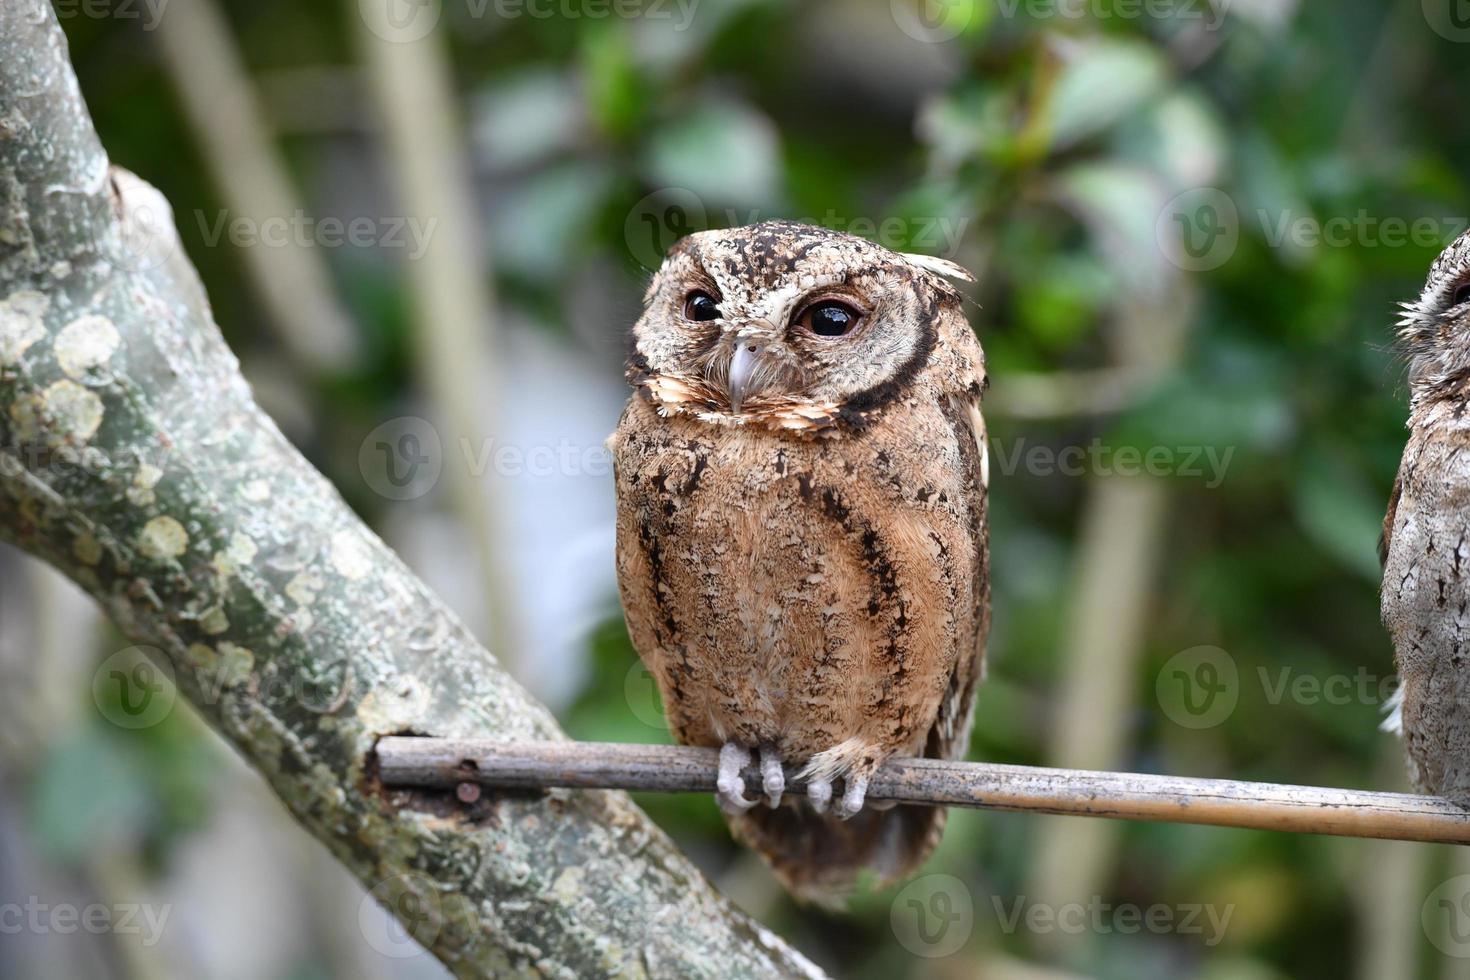 indonesia owl close up portrait looking at you photo